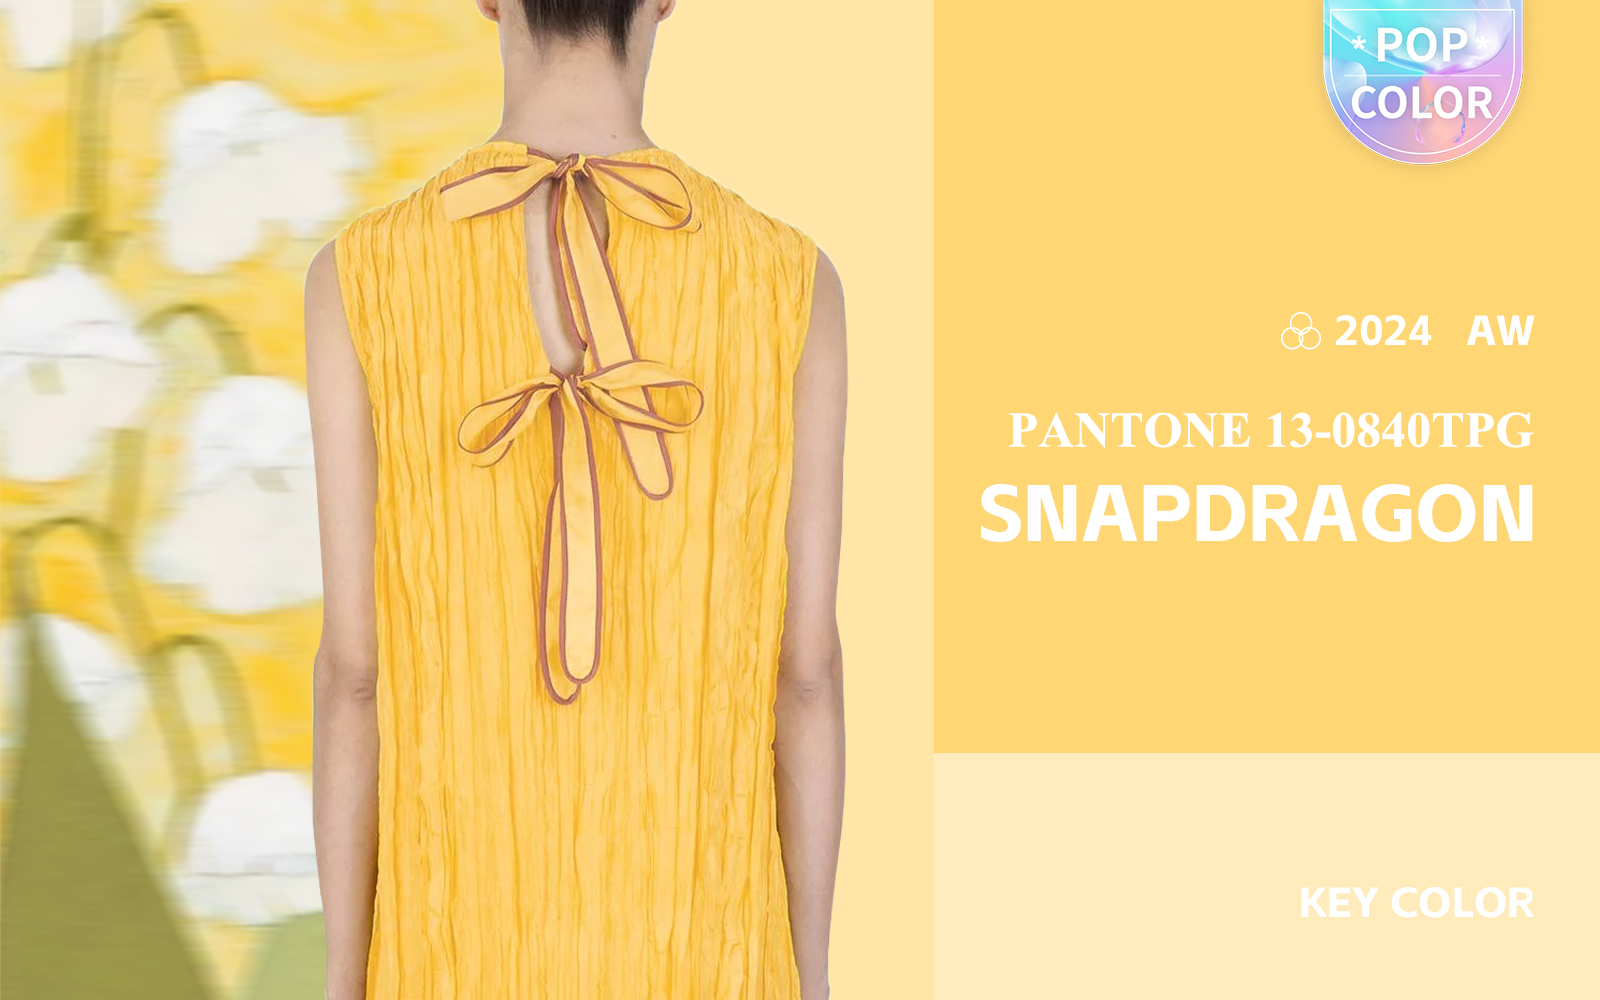 Snapdragon -- The Color Trend for Womenswear